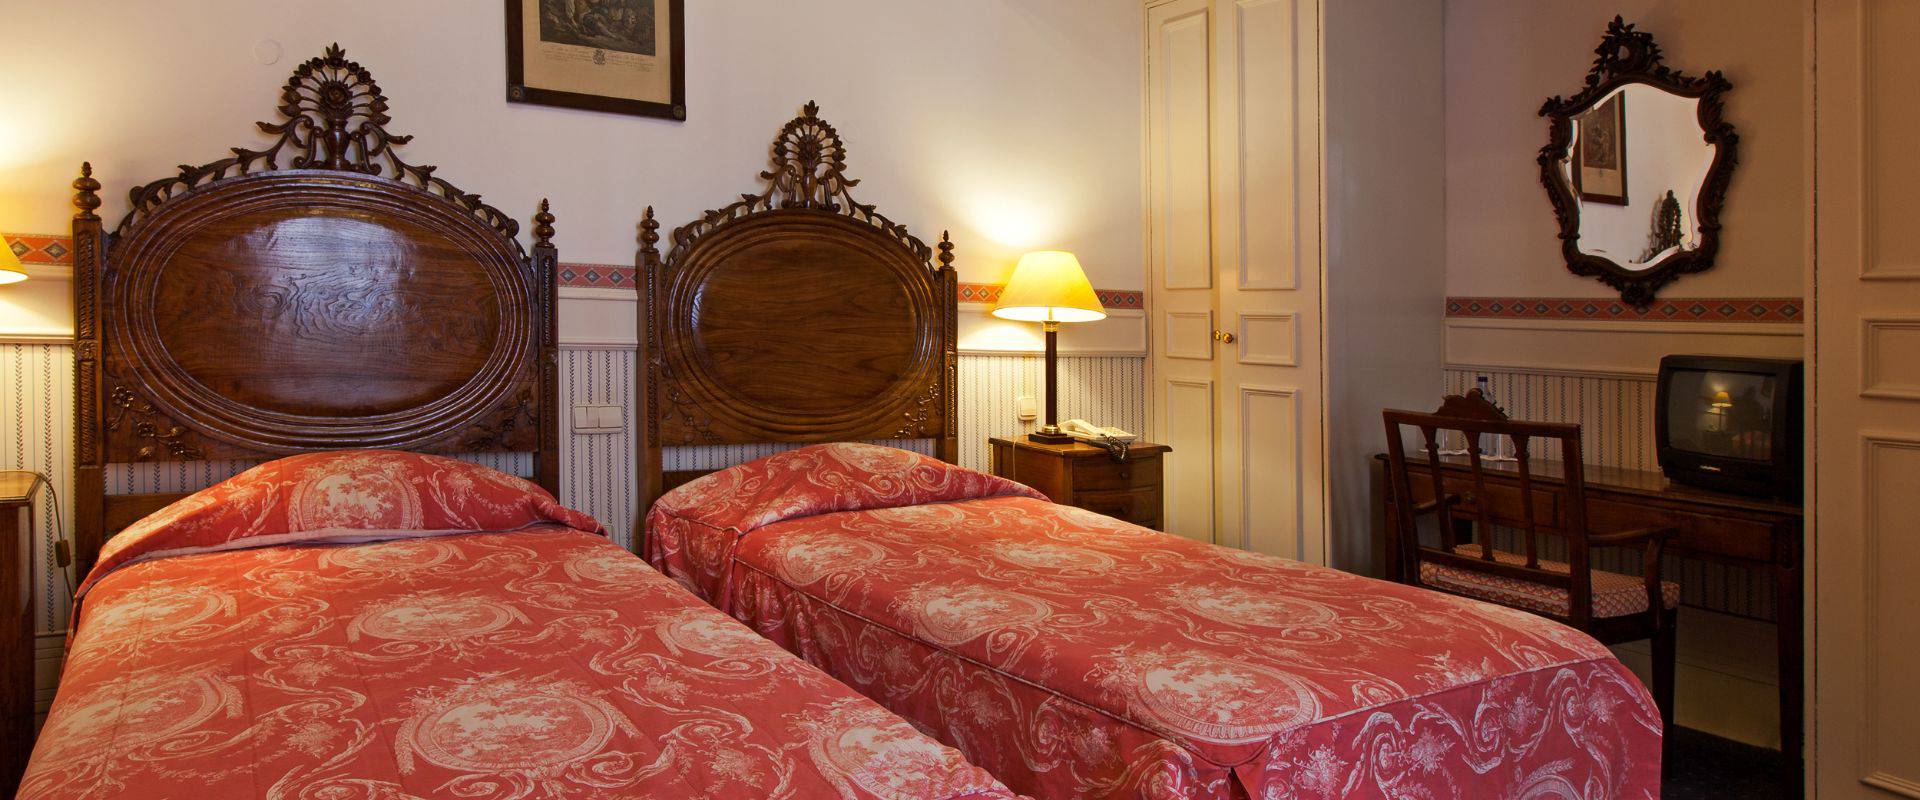 Superior room with extra bed  Palace Hotel Bussaco Coimbra